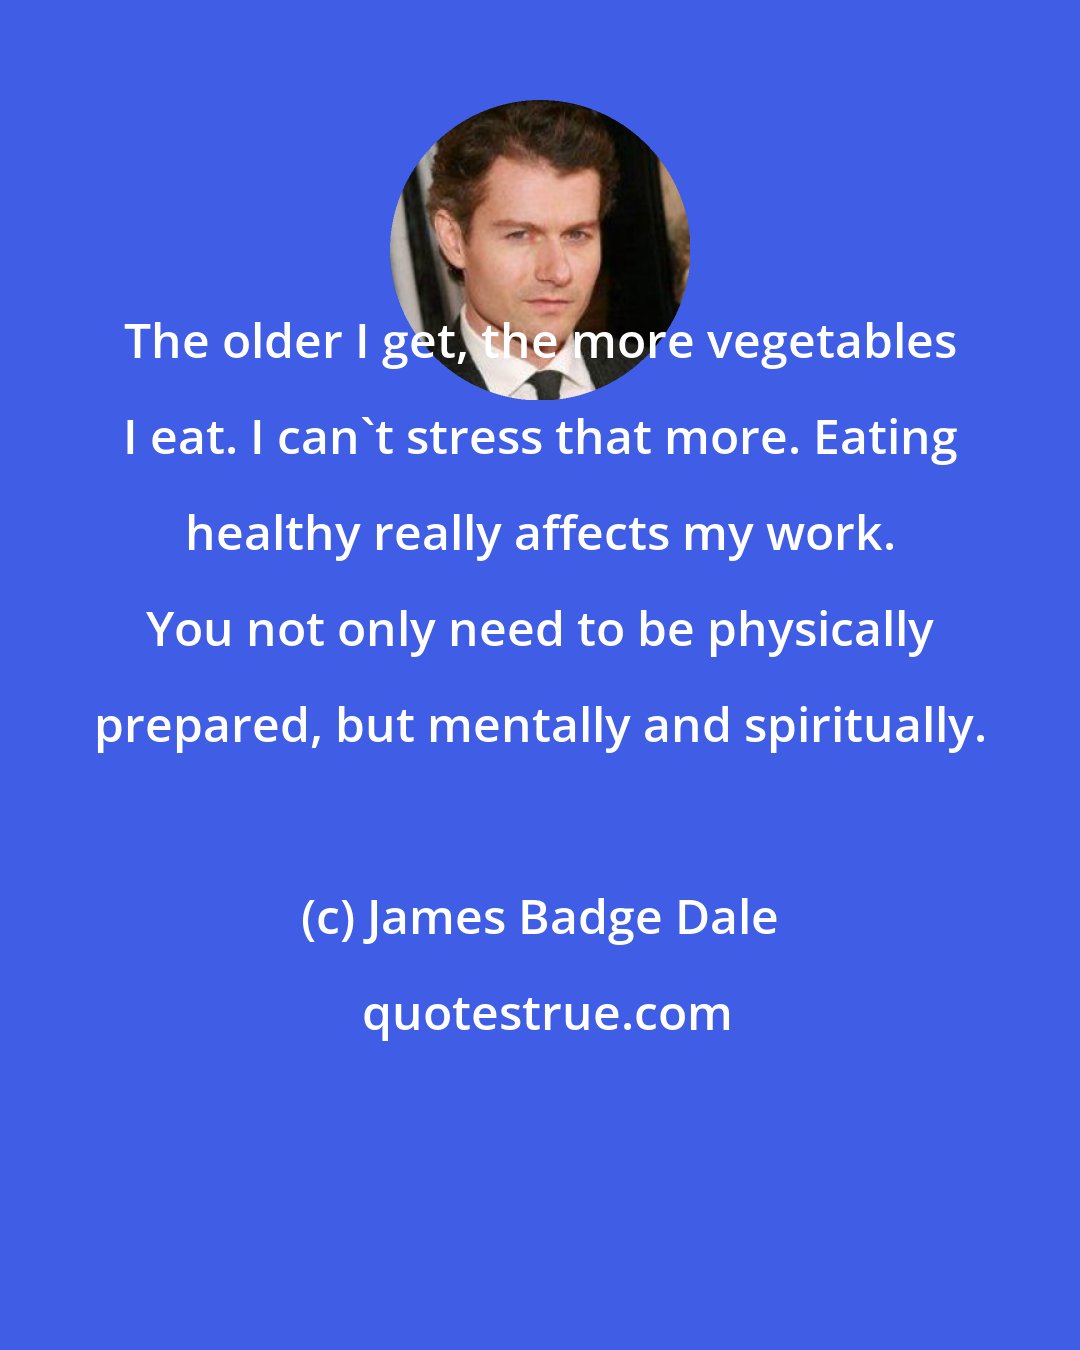 James Badge Dale: The older I get, the more vegetables I eat. I can't stress that more. Eating healthy really affects my work. You not only need to be physically prepared, but mentally and spiritually.